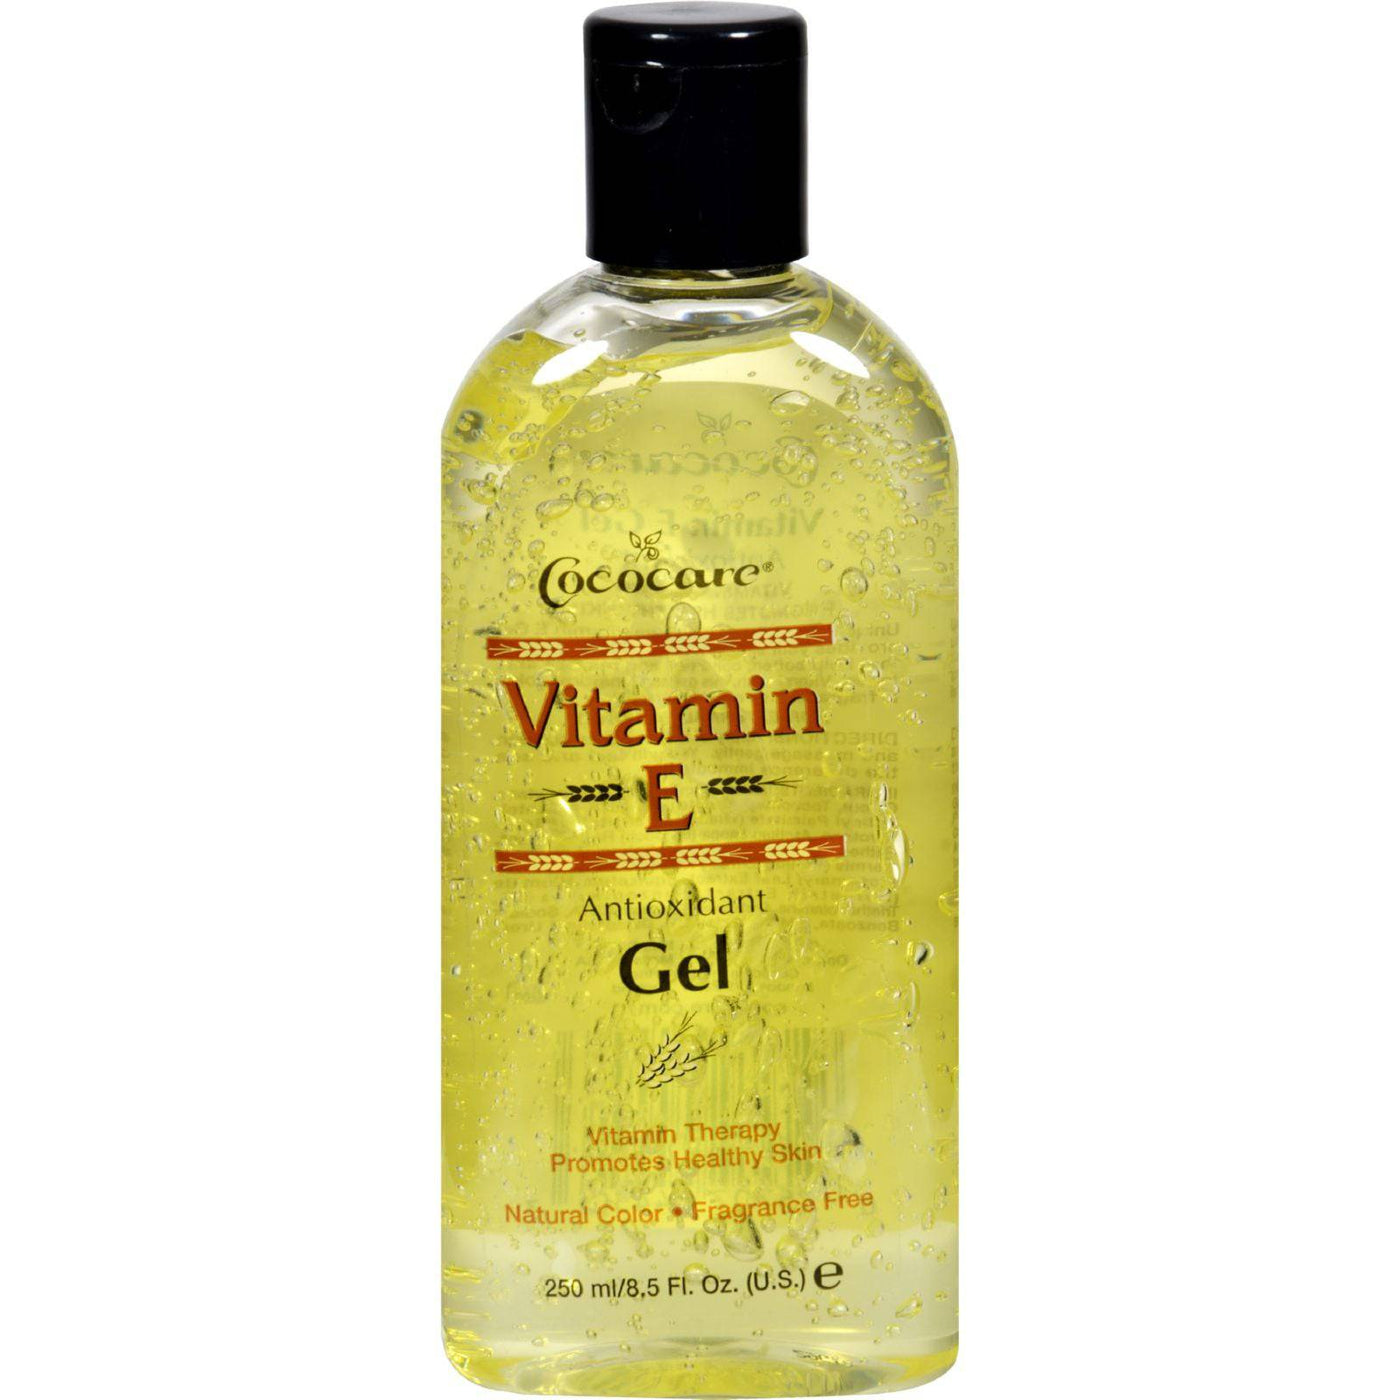 Buy Cococare Vitamin E Antioxidant Gel - 8.5 Oz  at OnlyNaturals.us